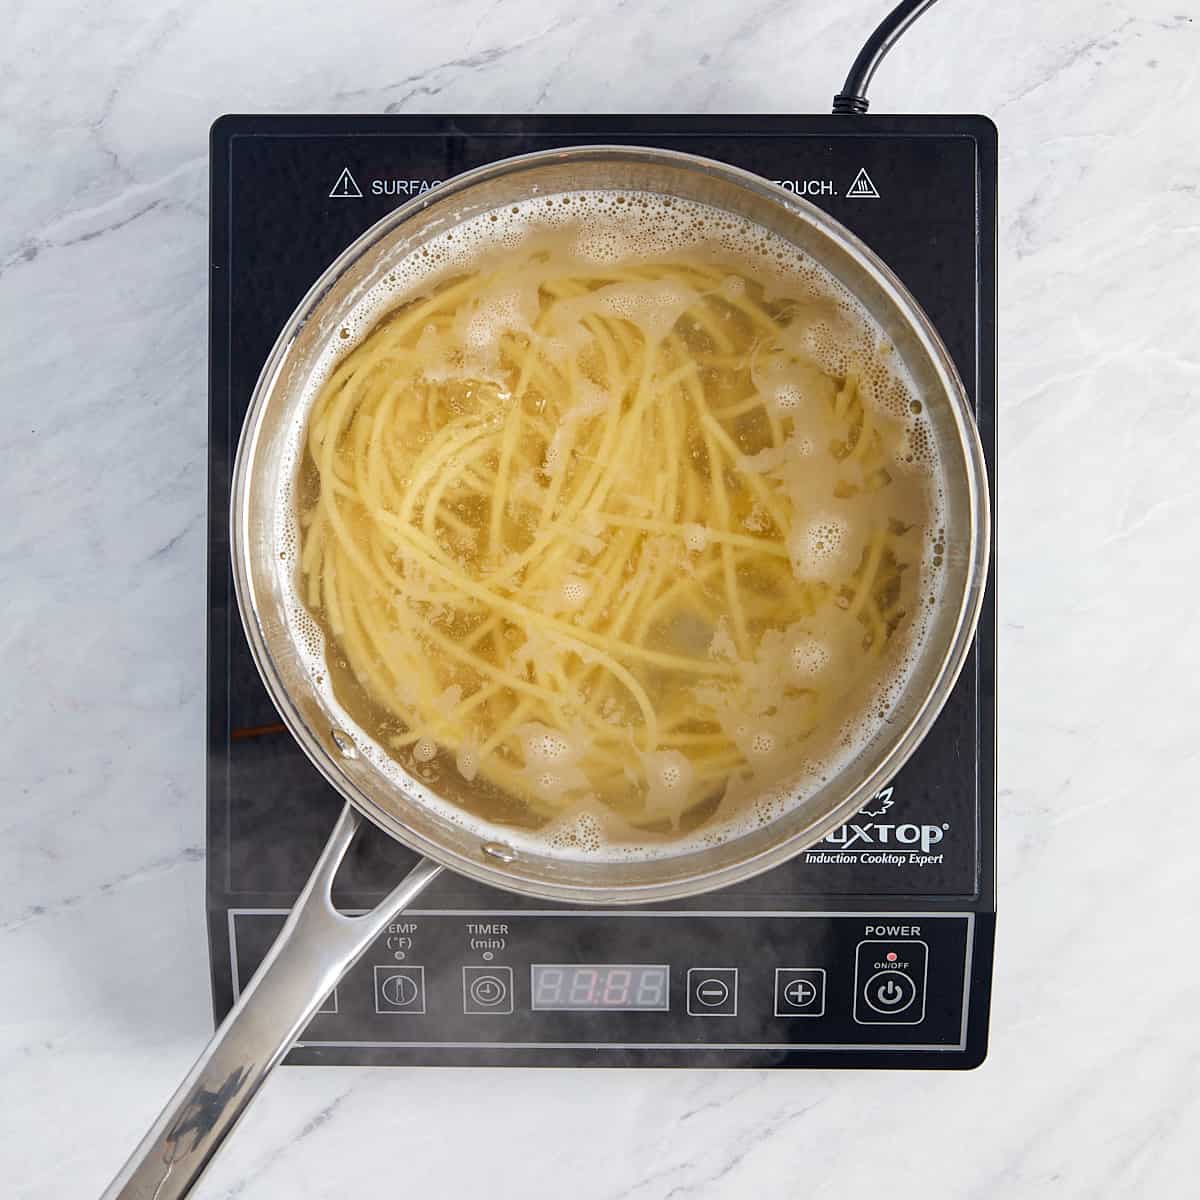 pasta cooking in a pot of water